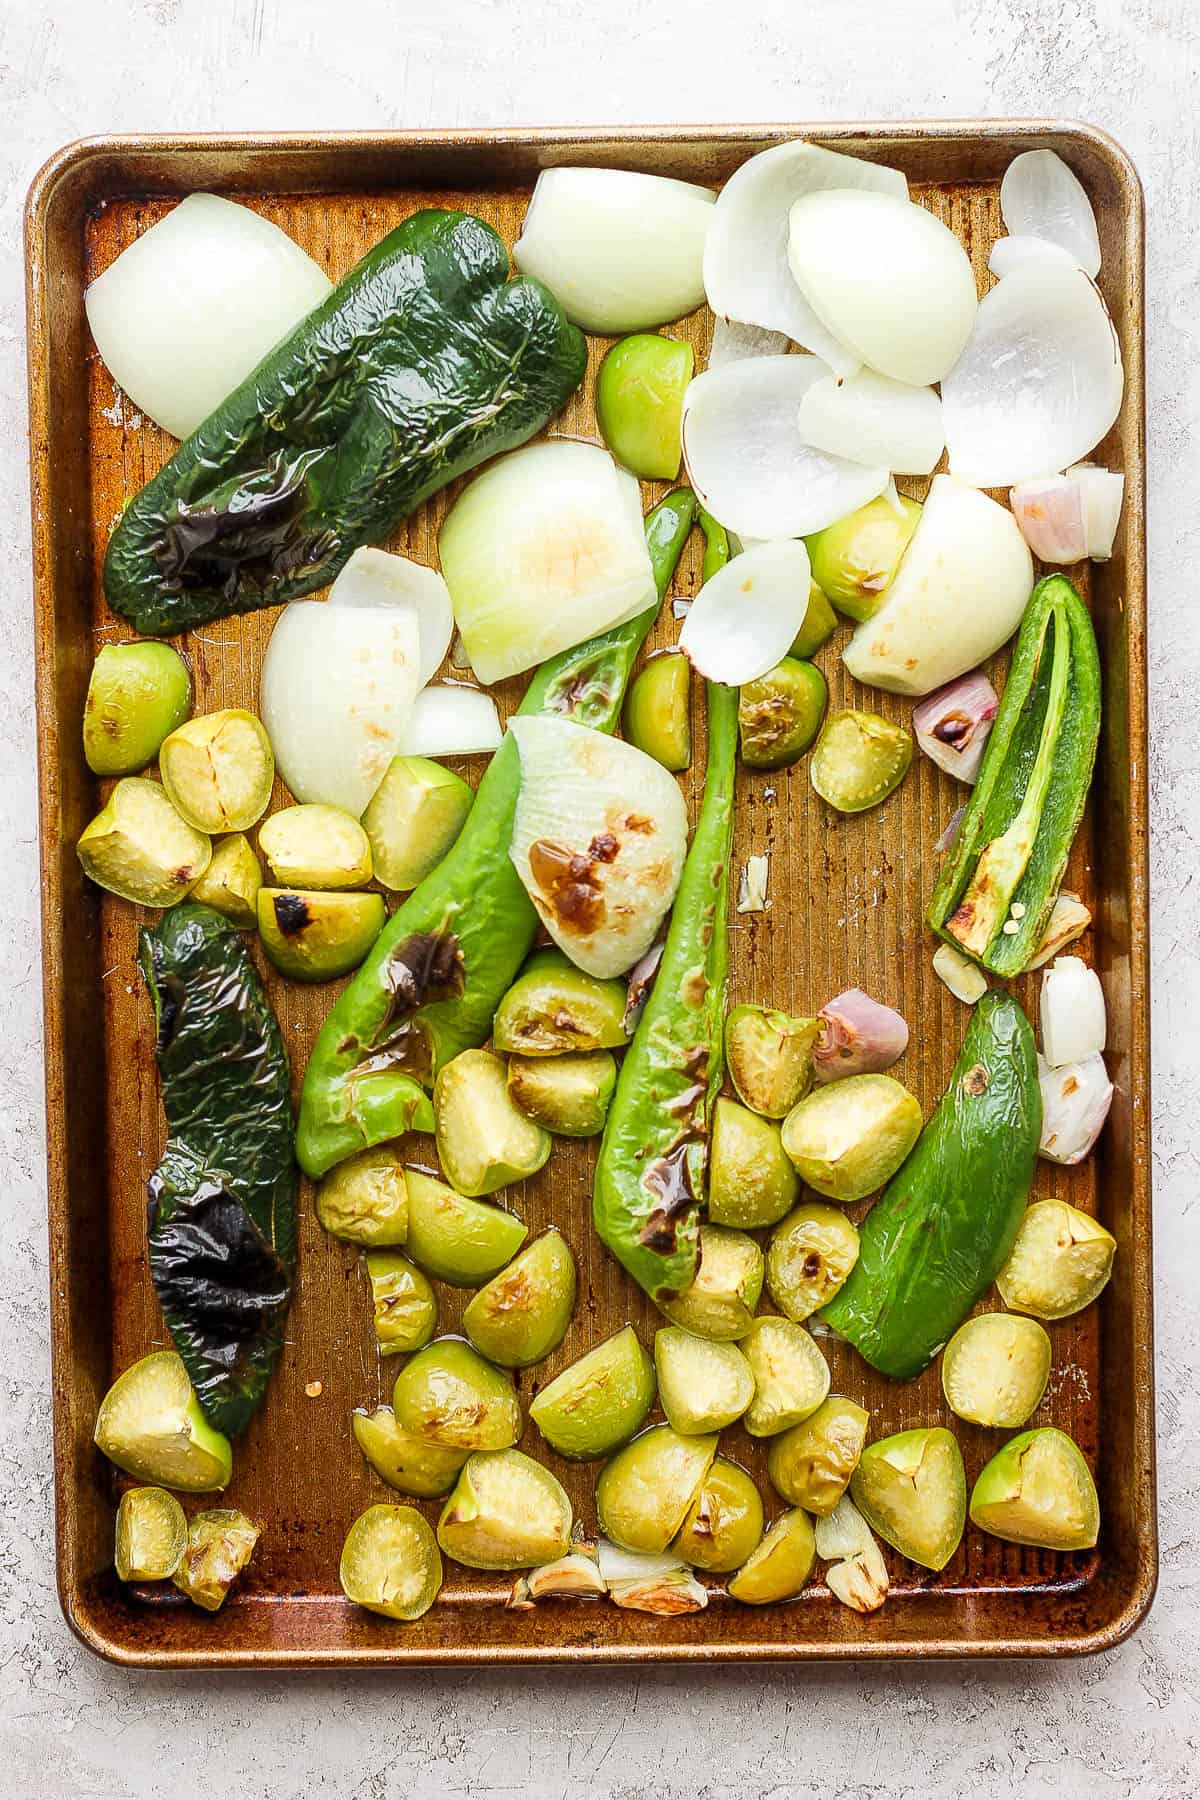 The roasted ingredients for salsa verde on a baking sheet after being roasted.